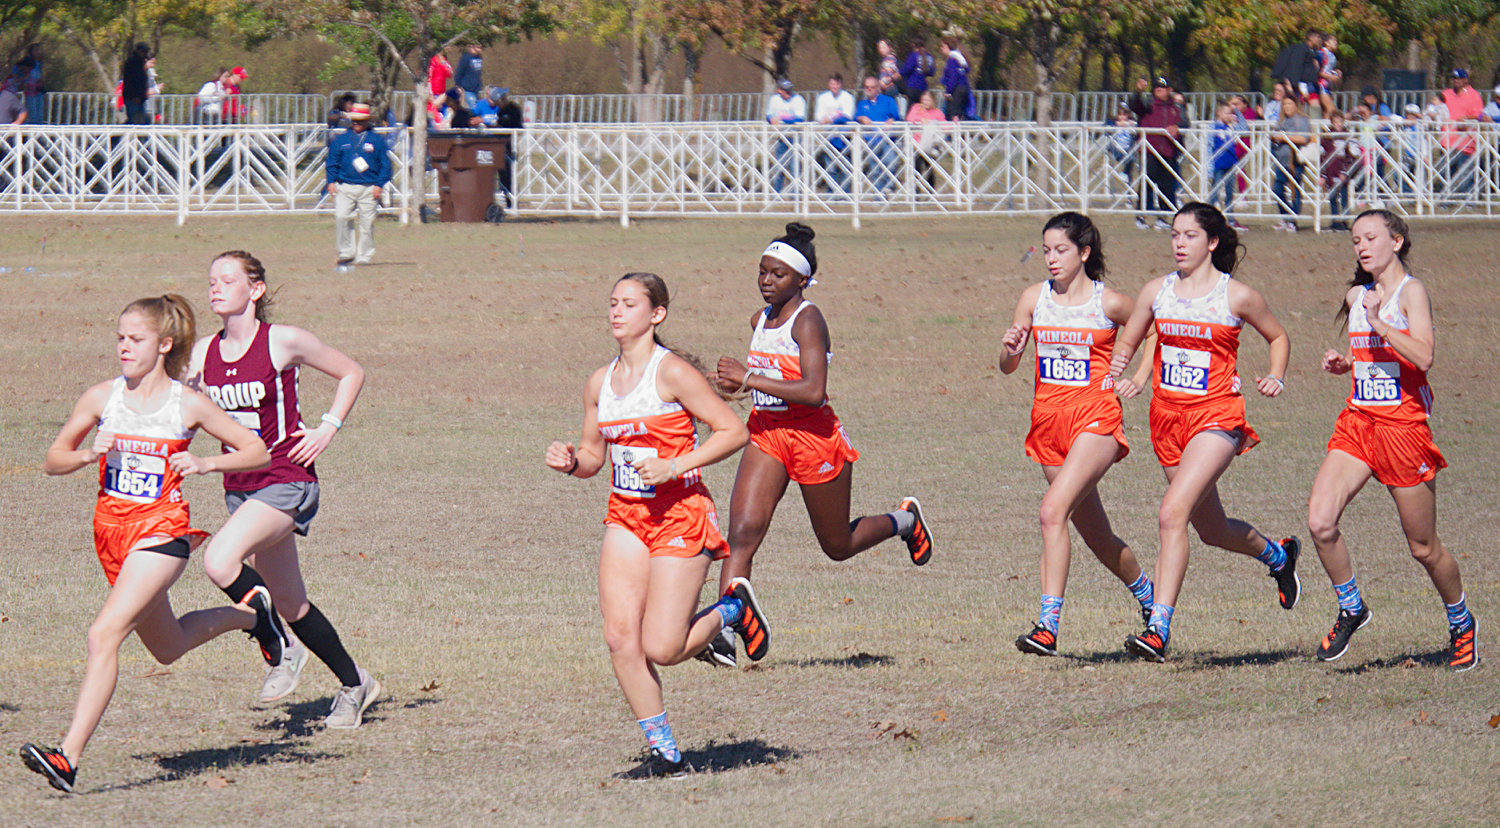 The Mineola girls cross country team competes at the state meet in Round Rock last Saturday. They include, from left, Juliana Stanley, Hannah Zoch, Shylah Kratzmeyer, Keilee Riley, Kapri Riley and Emily Wiley.